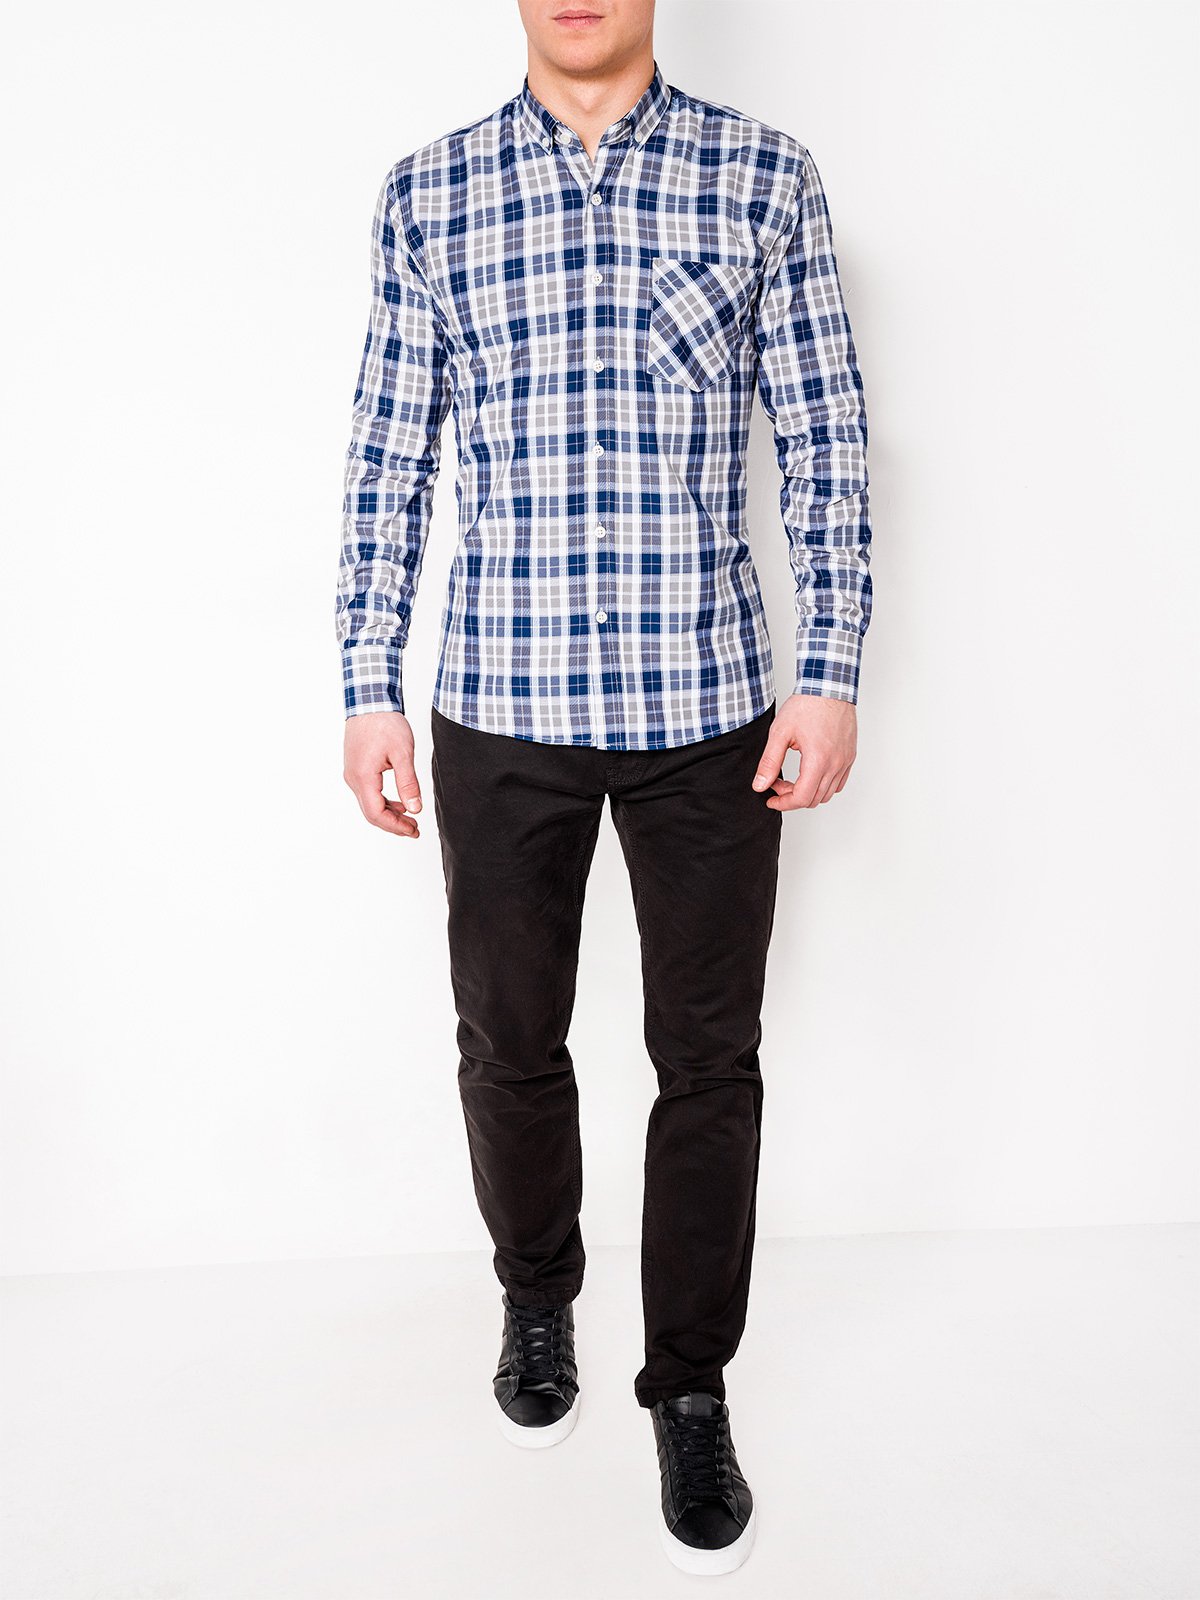 Men's check shirt with long sleeves K393 - blue/grey | MODONE wholesale ...